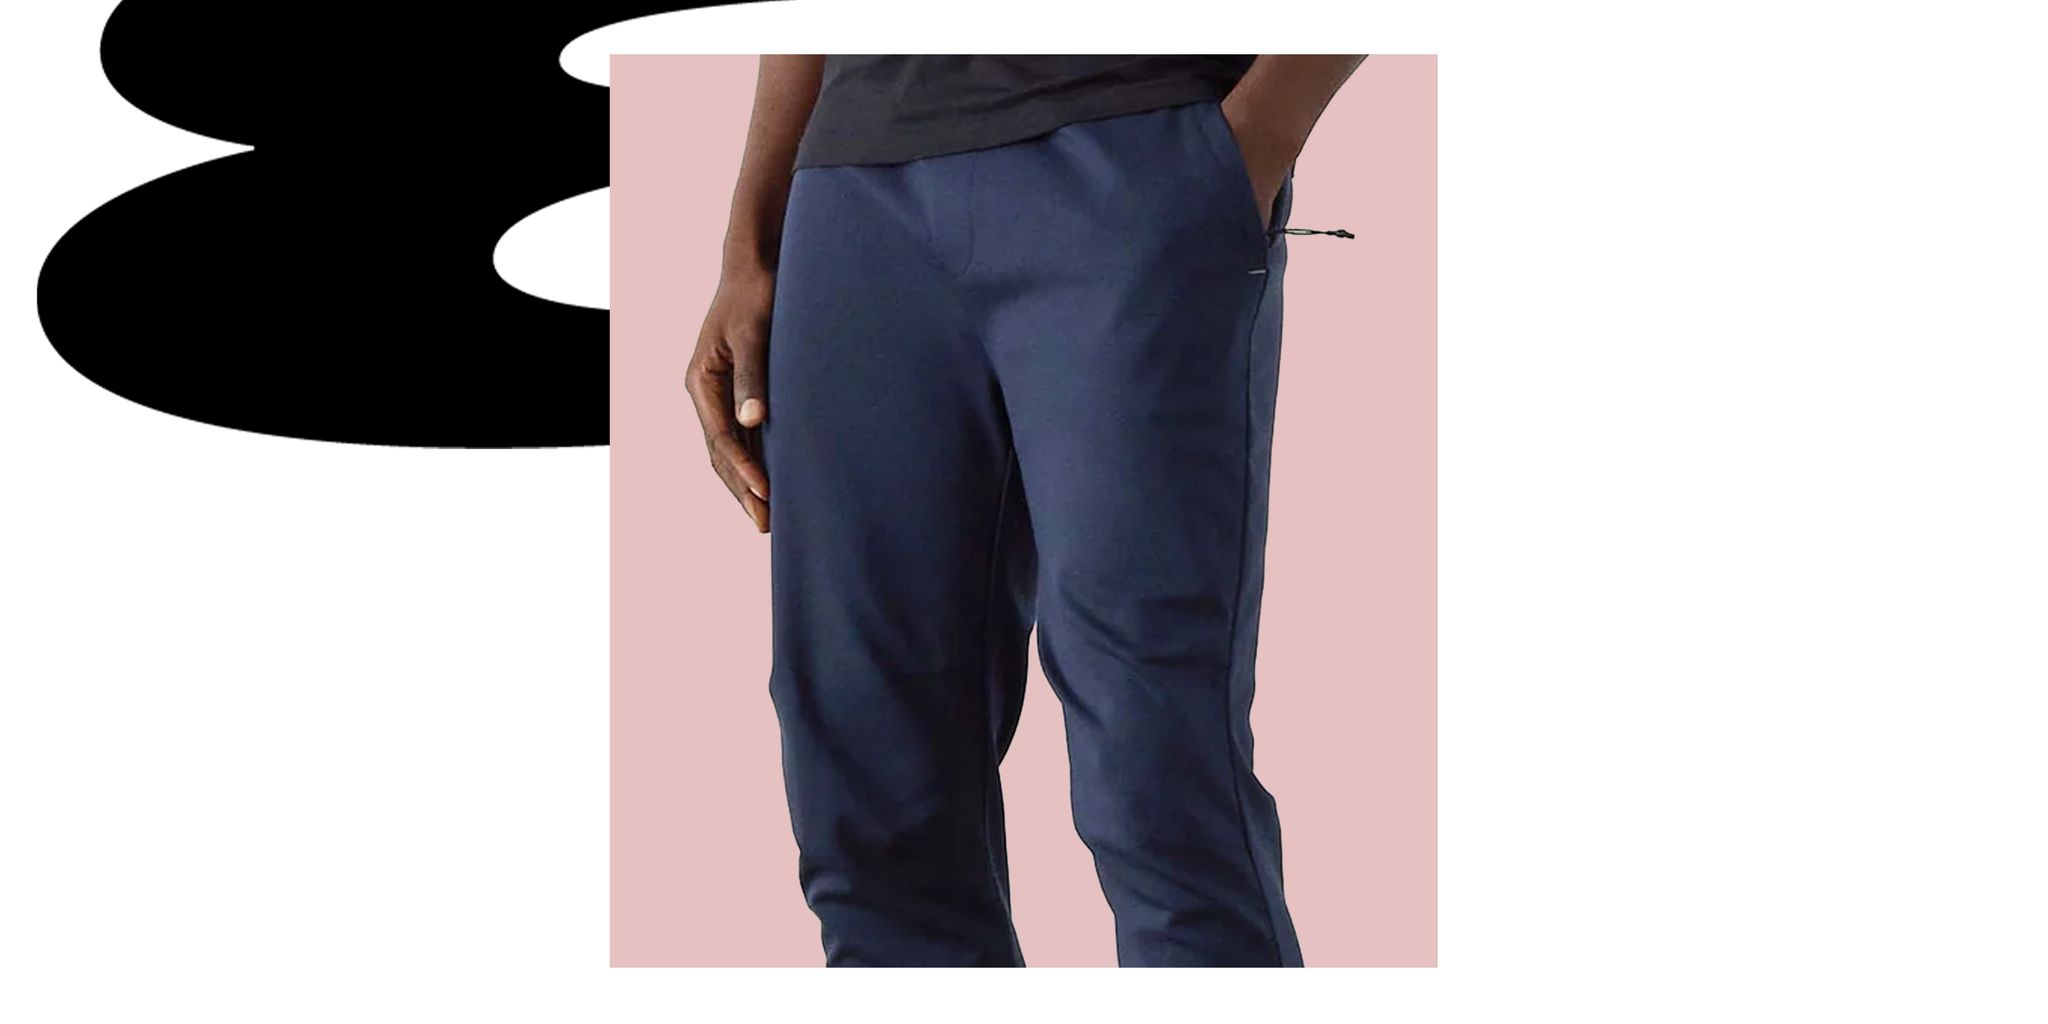 Joggers vs Sweatpants - Which Option is Best Fit For You?